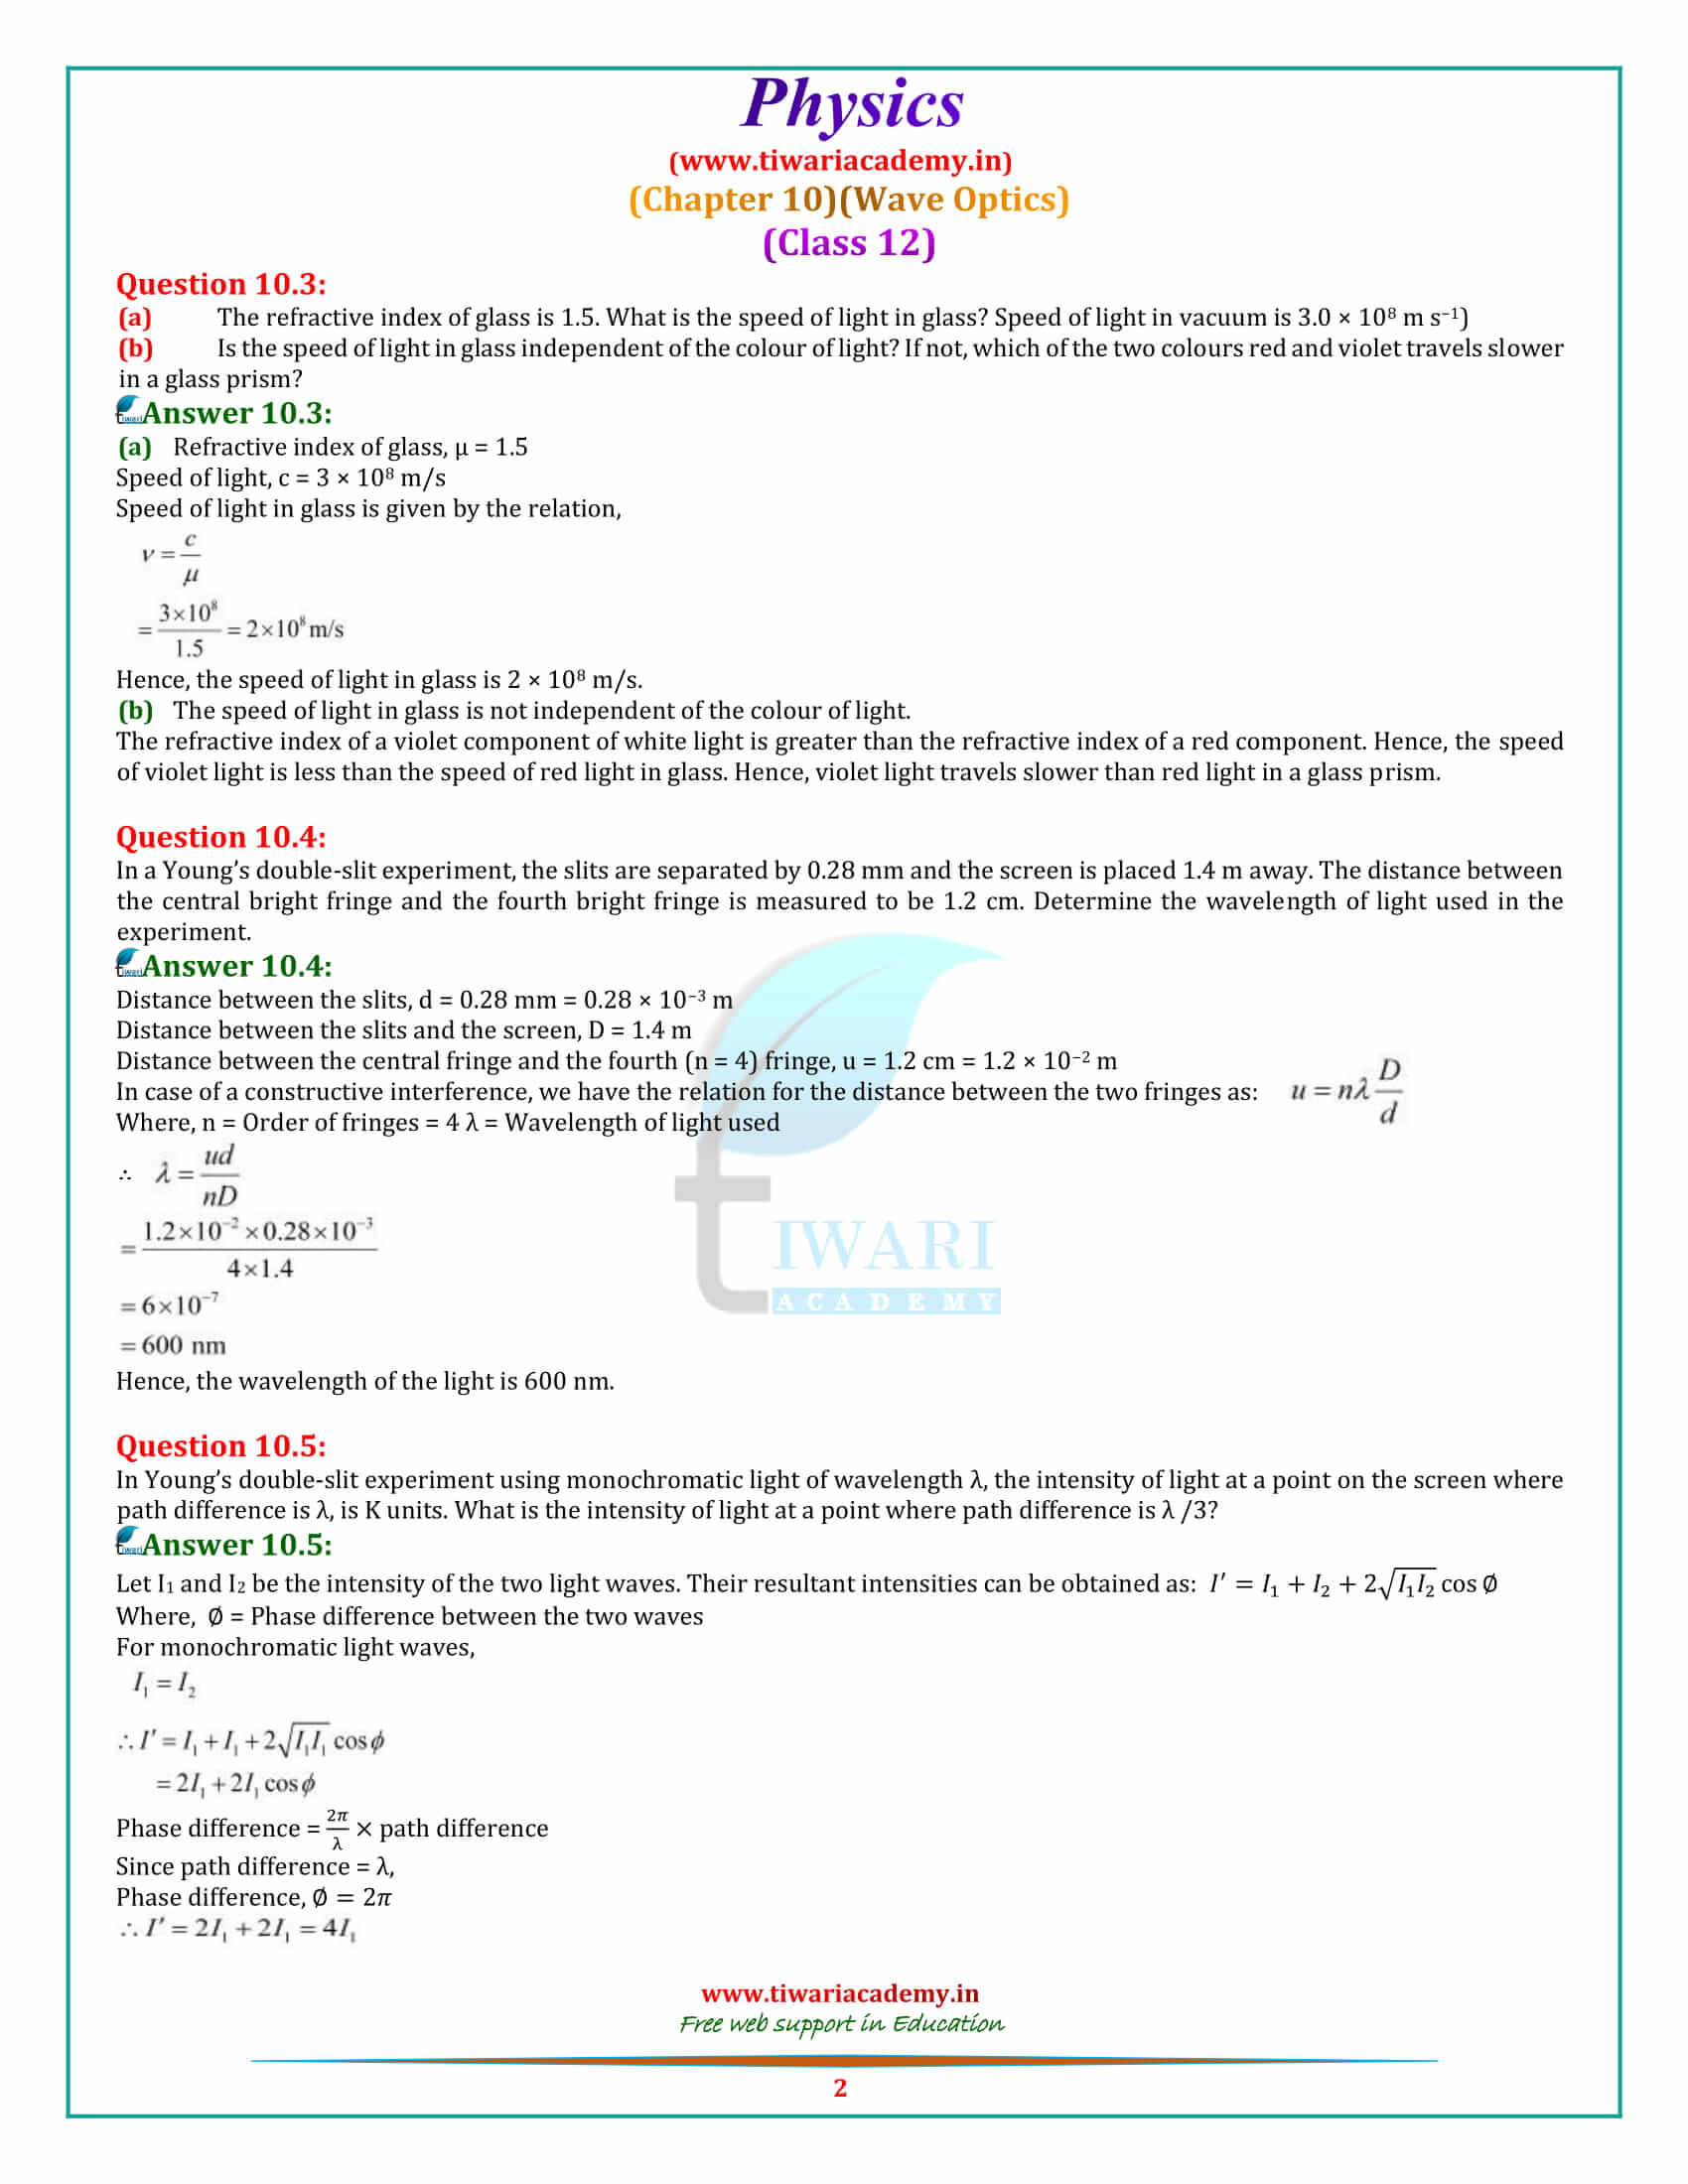 NCERT Solutions for Class 12 Physics Chapter 10 Wave Optics in pdf form